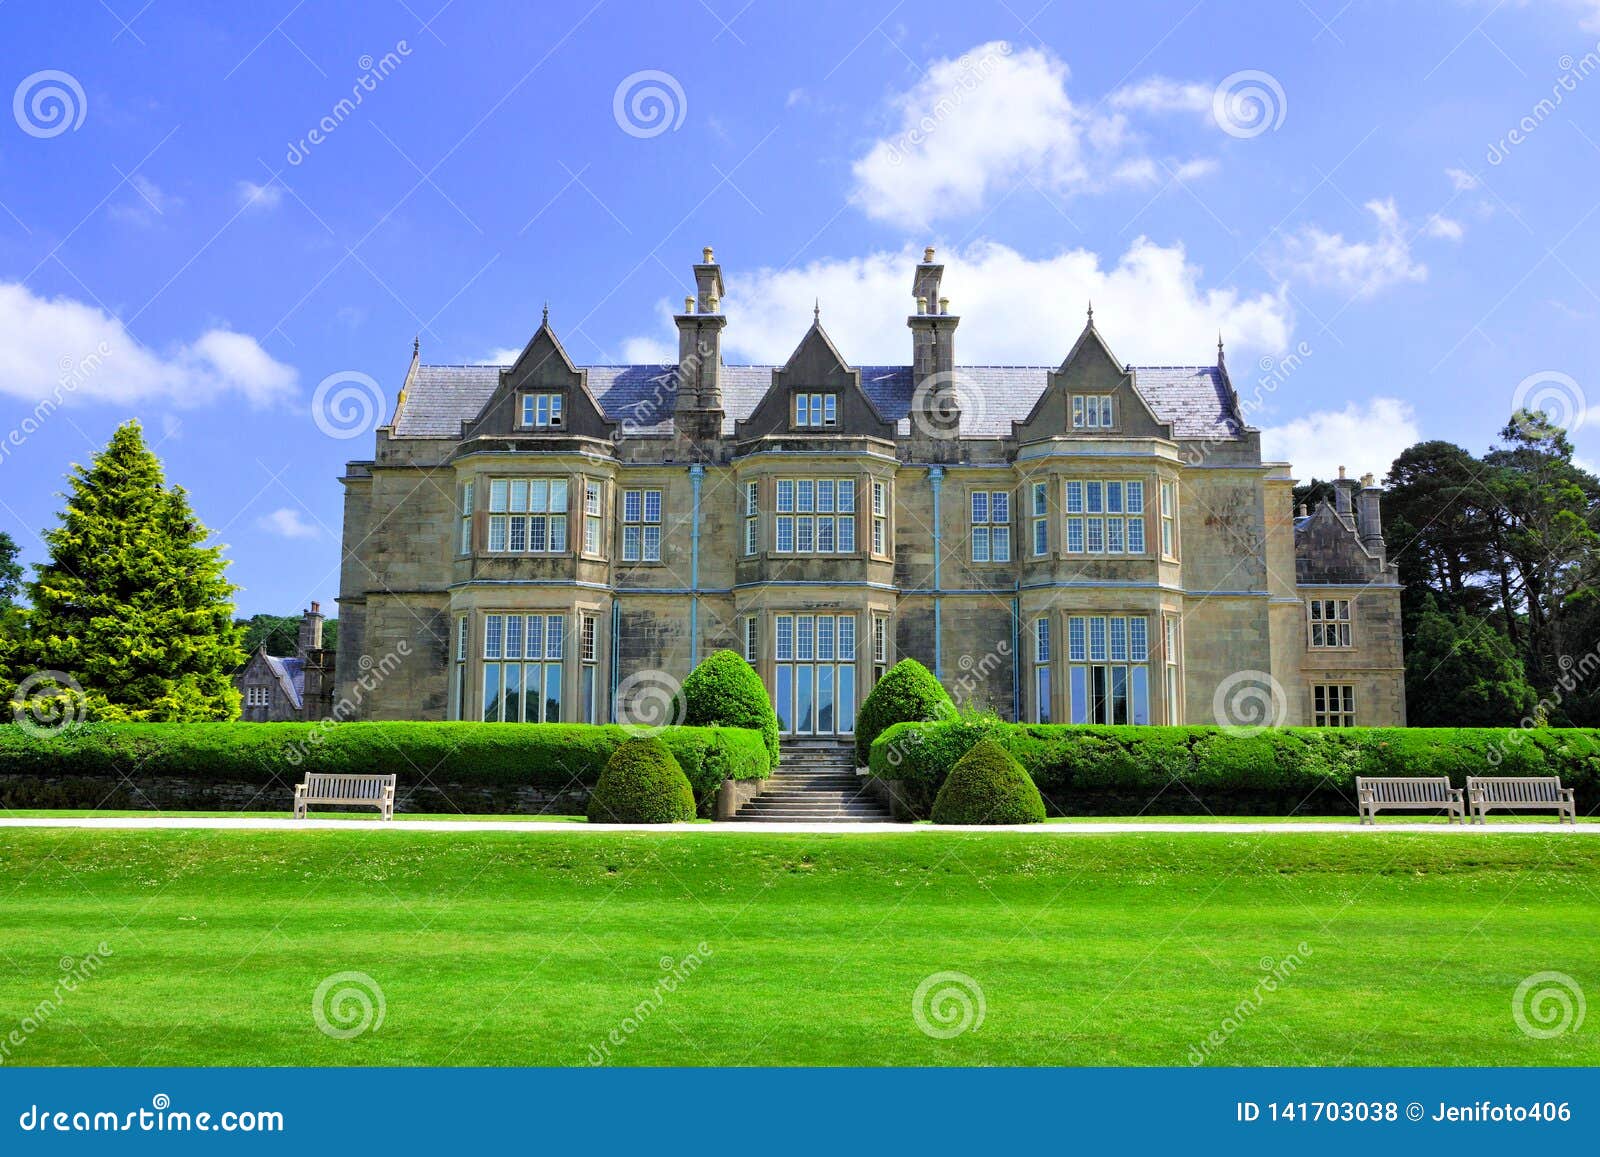 muckross house mansion with garden, killarney national park, ring of kerry, ireland